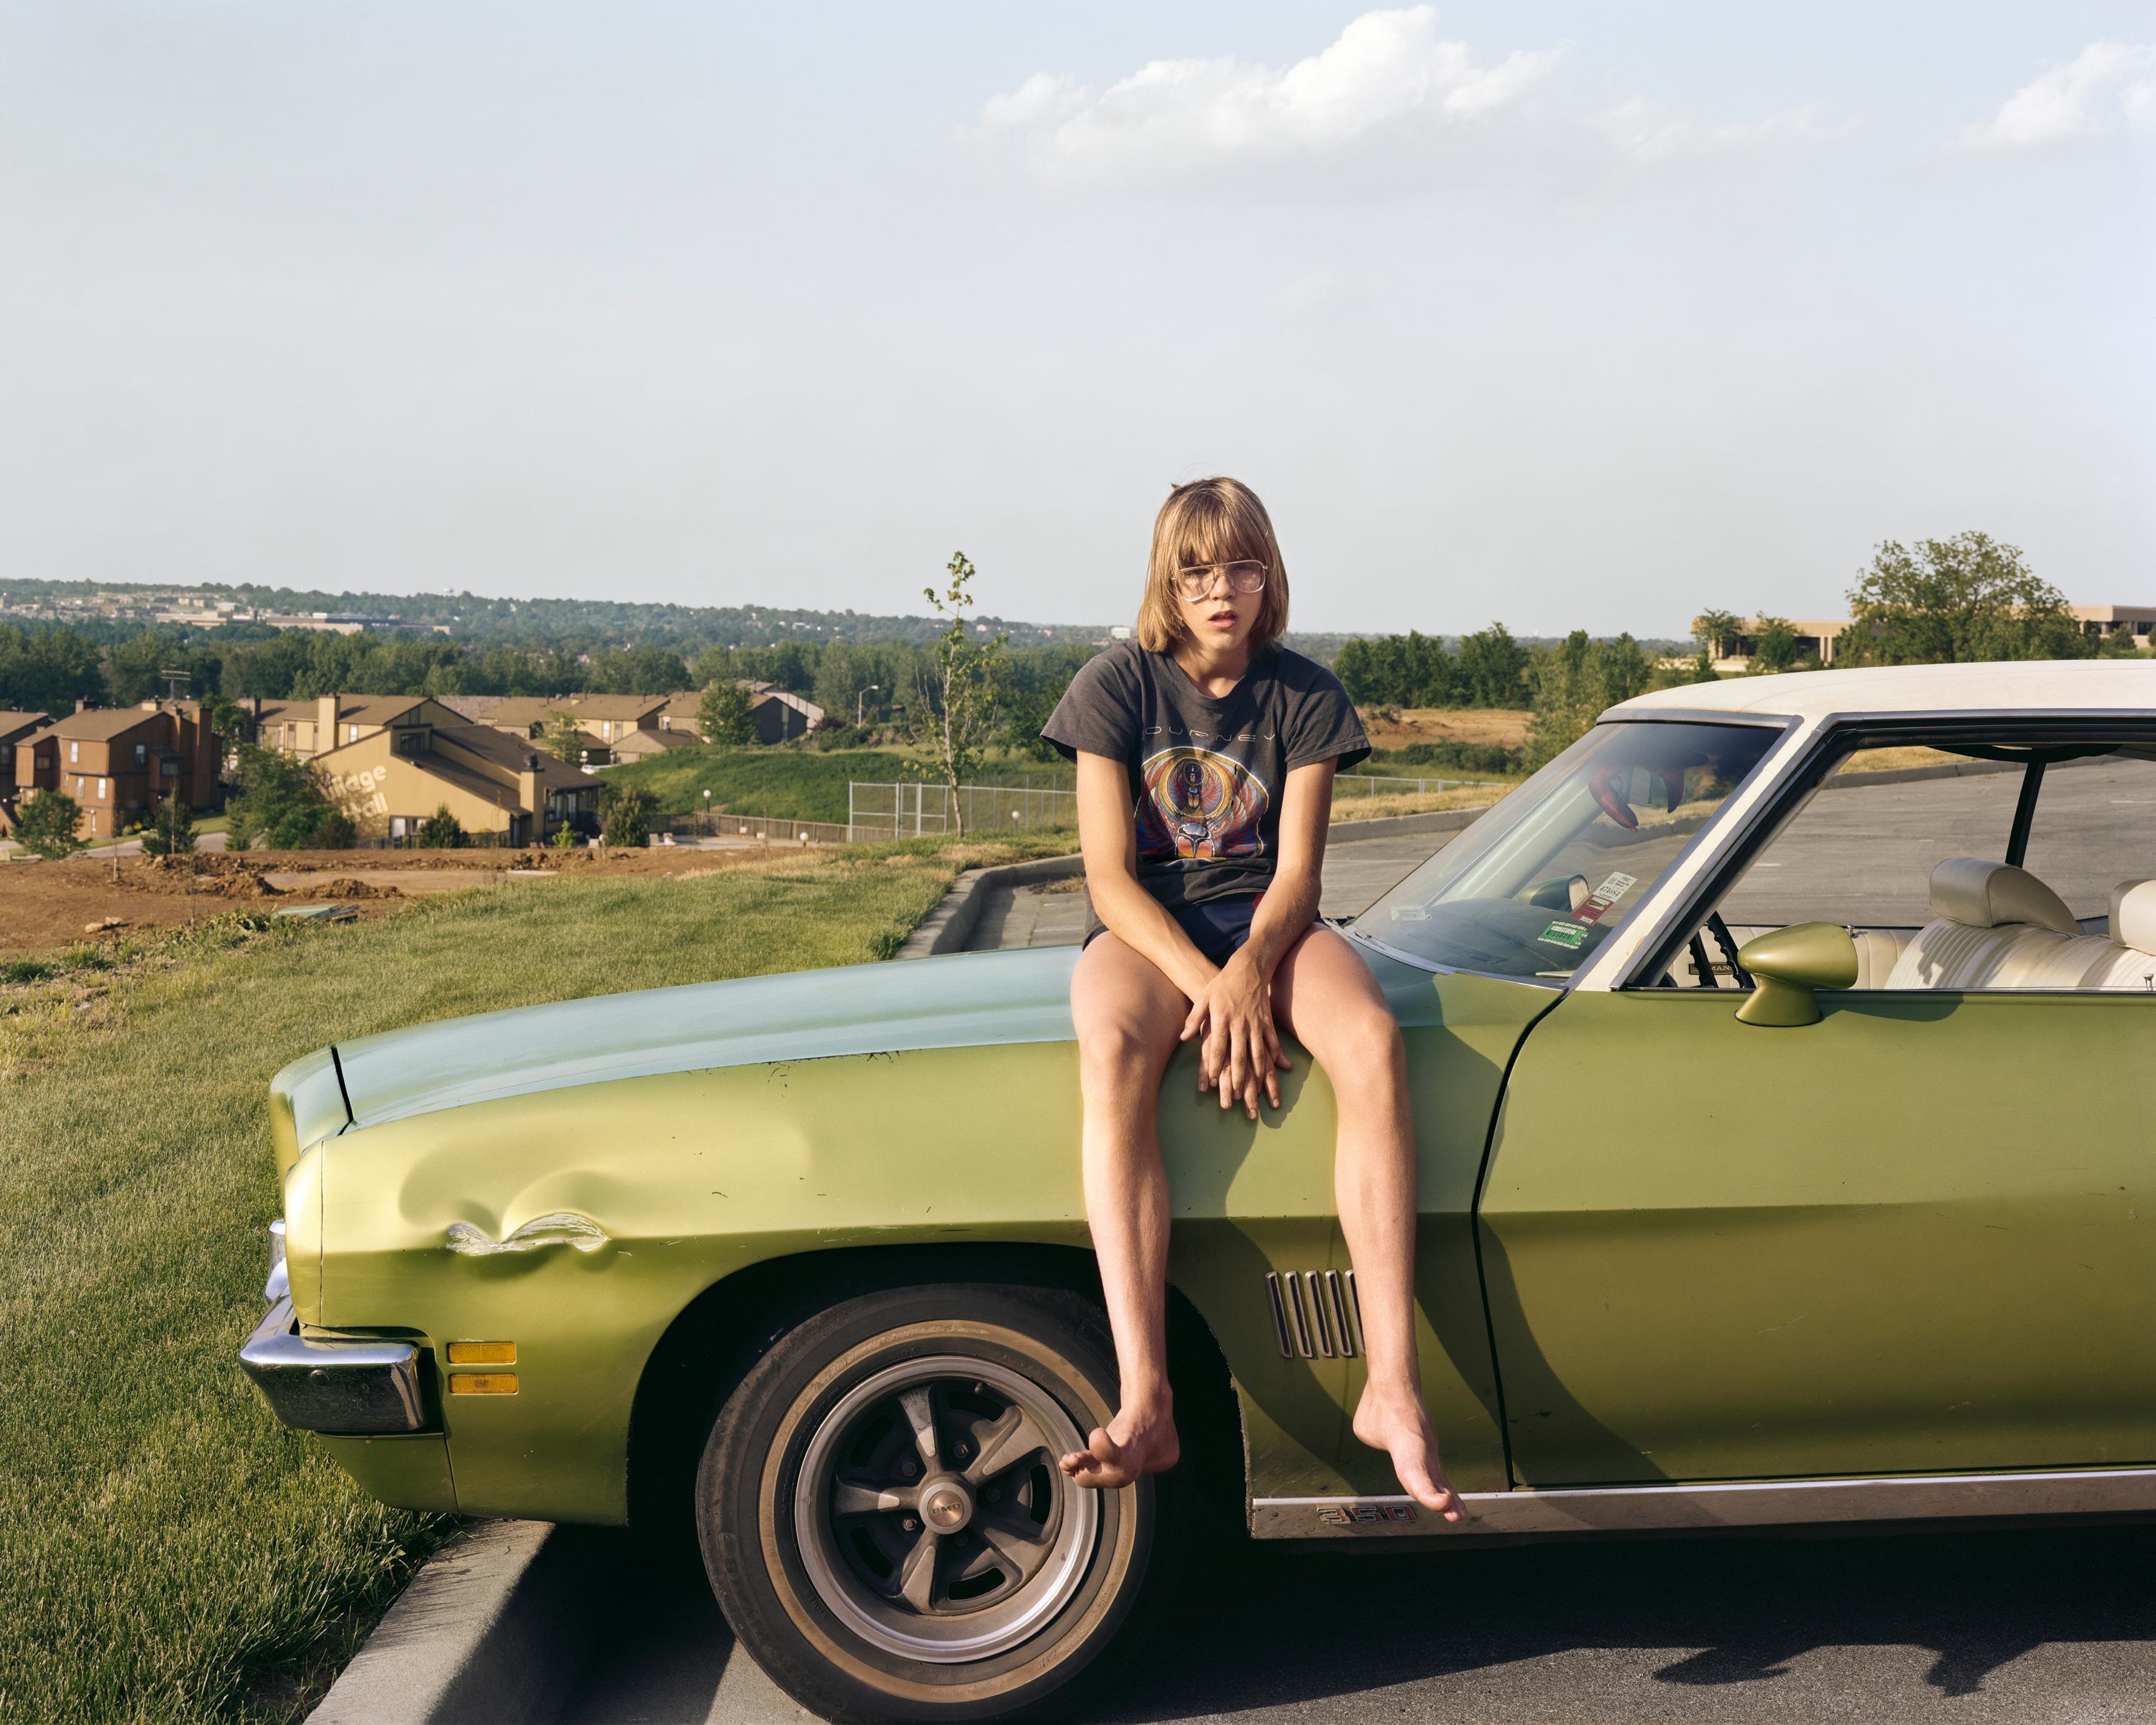 Kansas City, Kansas, May 1983 - Joel Sternfeld (Colour Photography)
Signed on reverse
C-type print, printed 1985
Printed on 16 x 20 inch paper

Joel Sternfeld (born 1944) is a photographer whose work sits within the American documentary tradition of